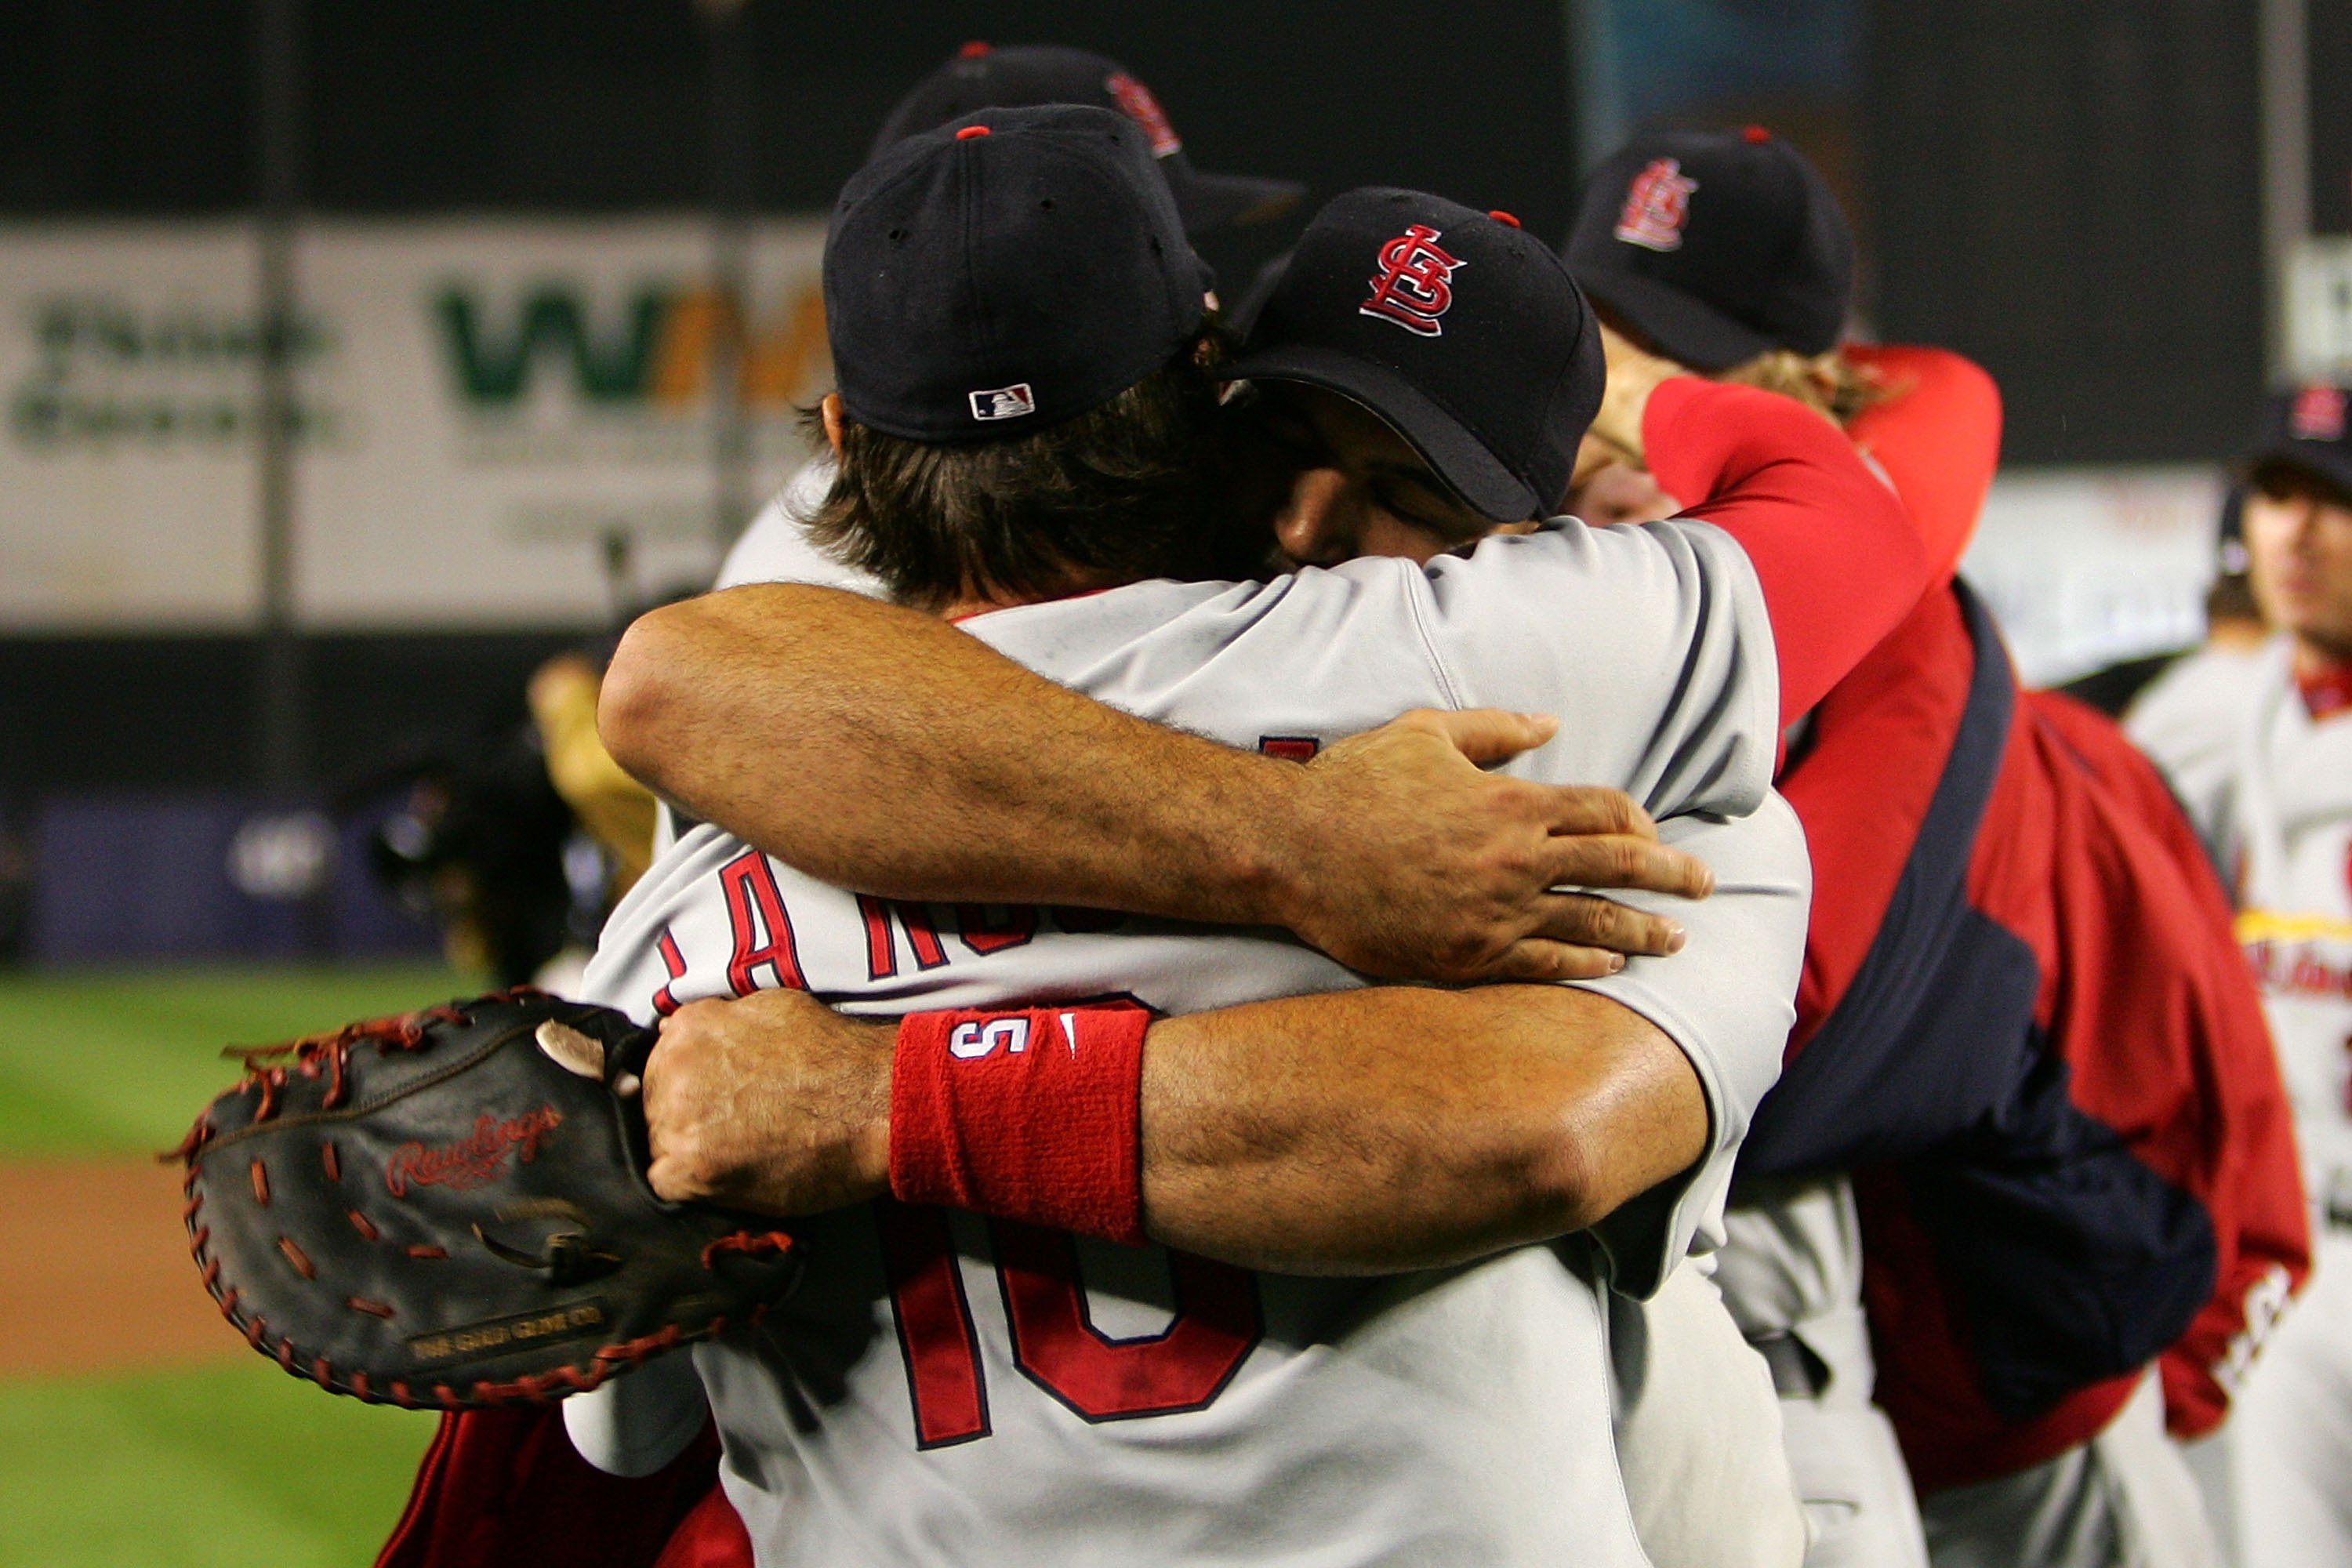 NEW YORK - OCTOBER 19: Albert Pujols #5 and manager Tony LaRussa #10 of the St. Louis Cardinals embrace after defeating the New York Mets 3 to 1 in game seven of the NLCS at Shea Stadium on October 19, 2006 in the Flushing neighborhood of the Queens borou